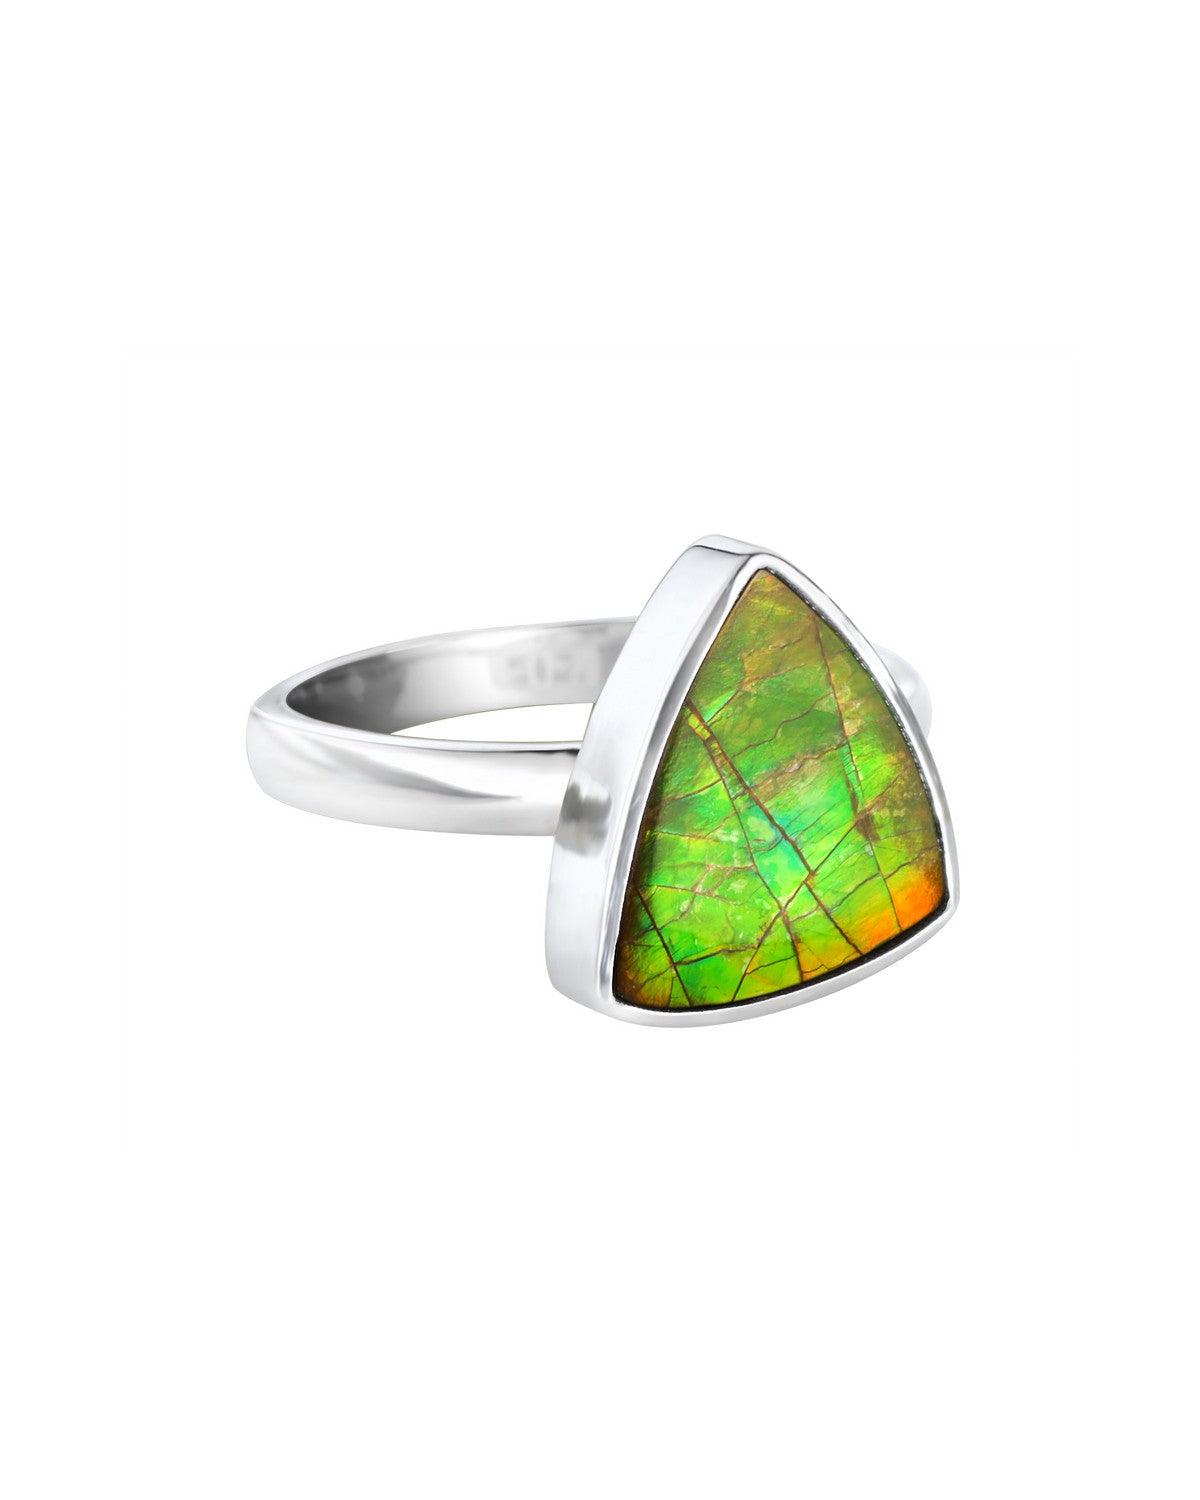 5.25 Ct. Ammolite Ring Solid 925 Sterling Silver Jewelry - YoTreasure